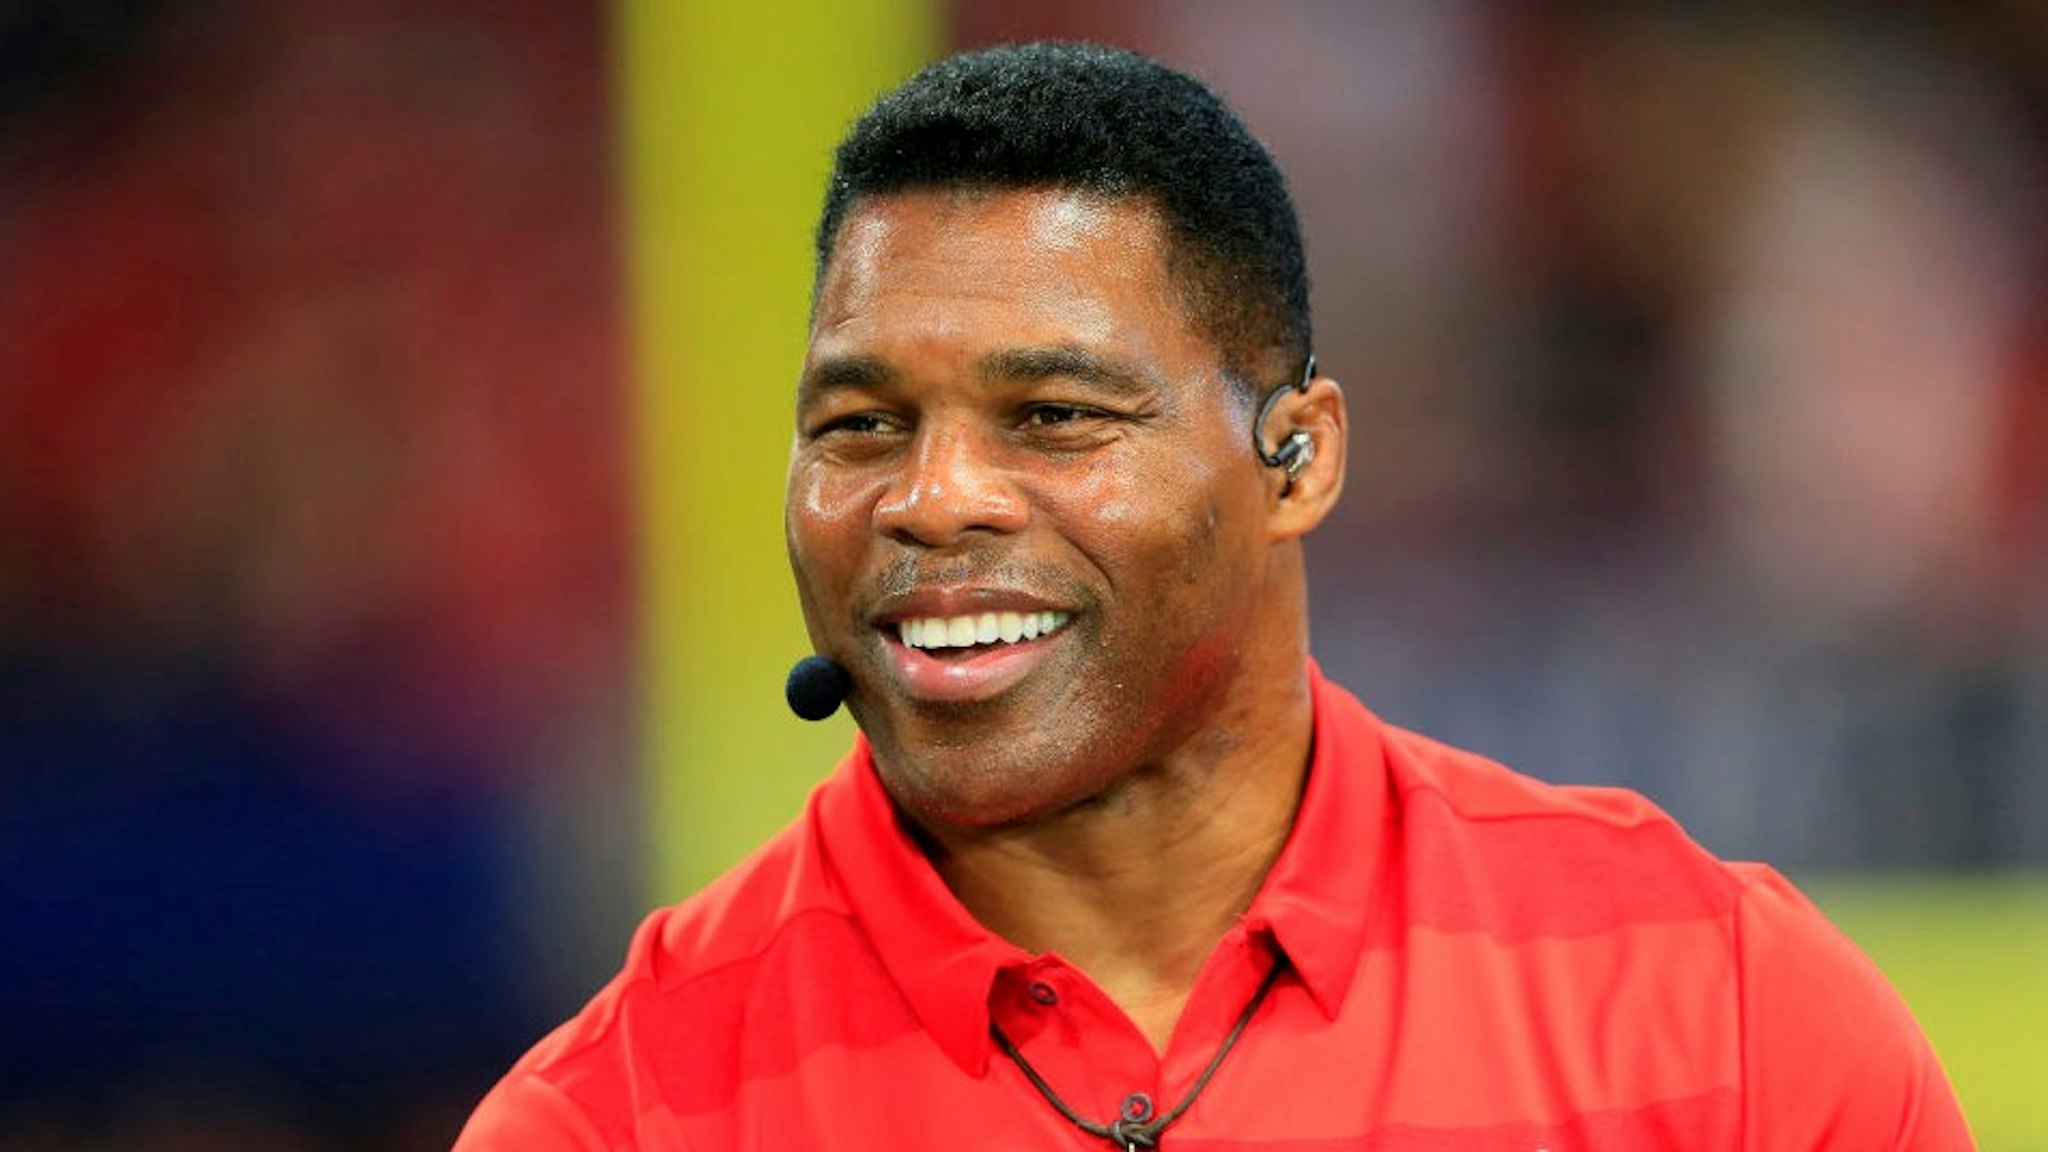 ATLANTA, GA - DECEMBER 07: Former UGA football great Herschel Walker was a guest on the pregame show before the SEC Championship Game between the UGA Bulldogs and the LSU Tigers on December 7, 2019 at the Mercedes-Benz Stadium in Atlanta, Georgia. (Photo by